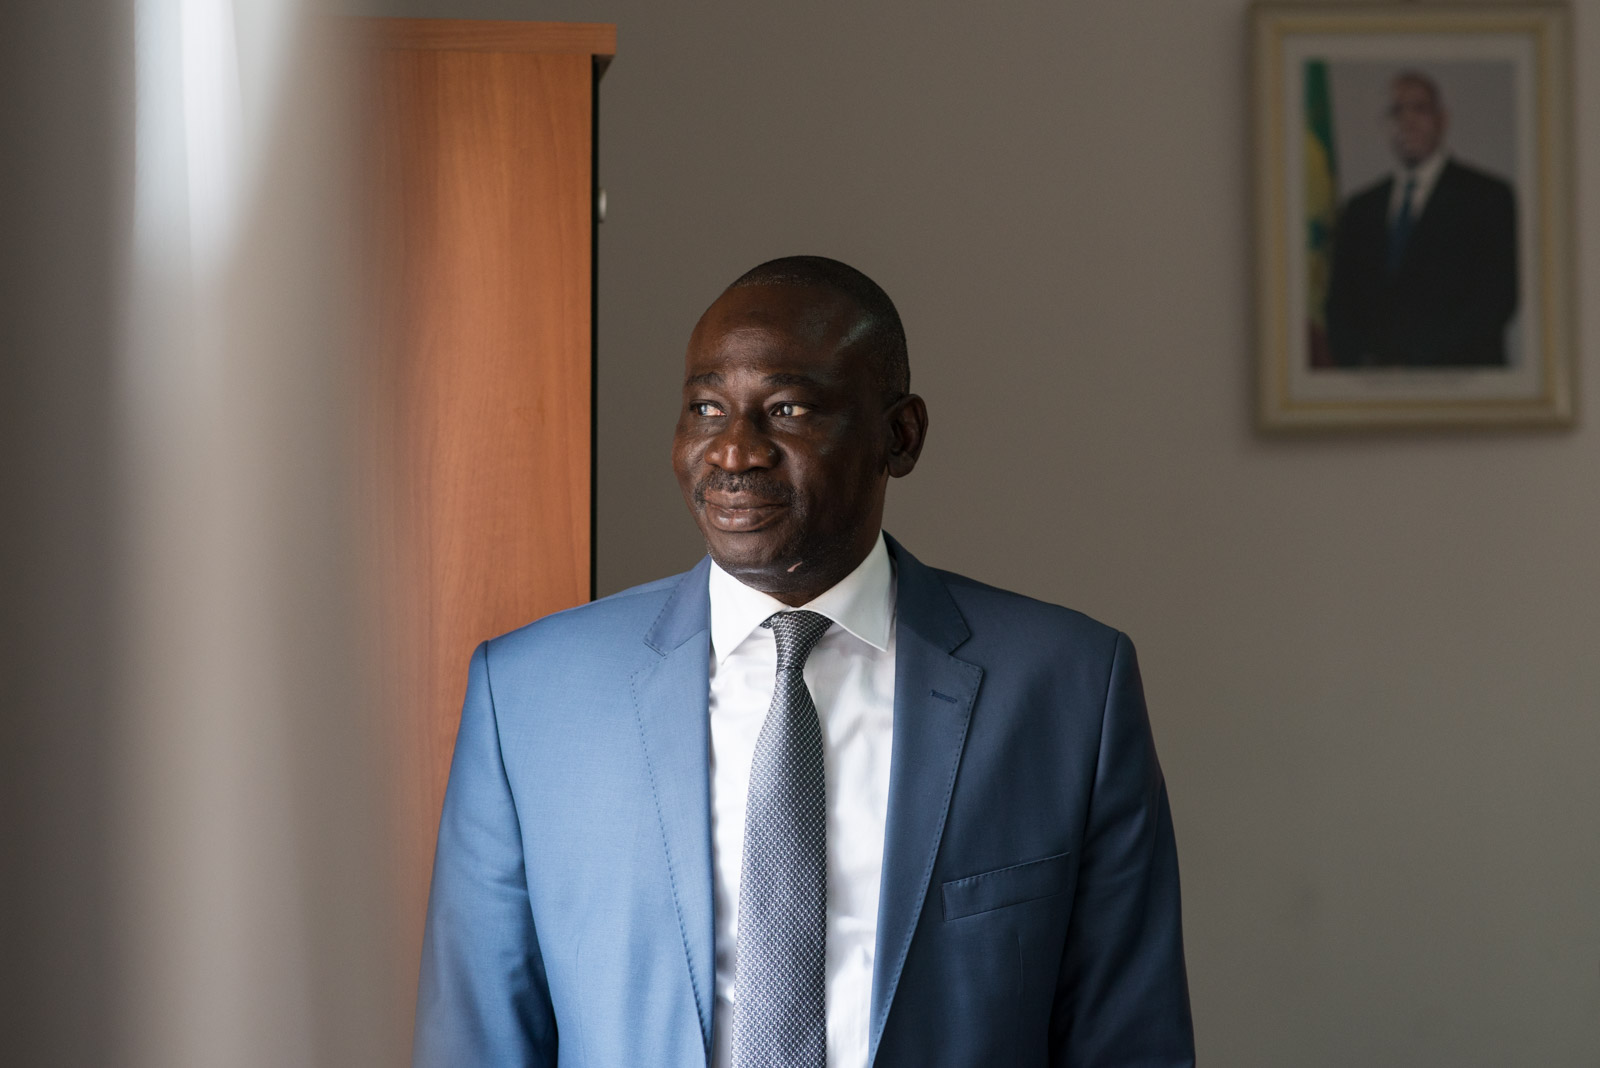 Professor Cheikh Tidiane Ndour at his office in Dakar&#39;s Polyclinique hospital